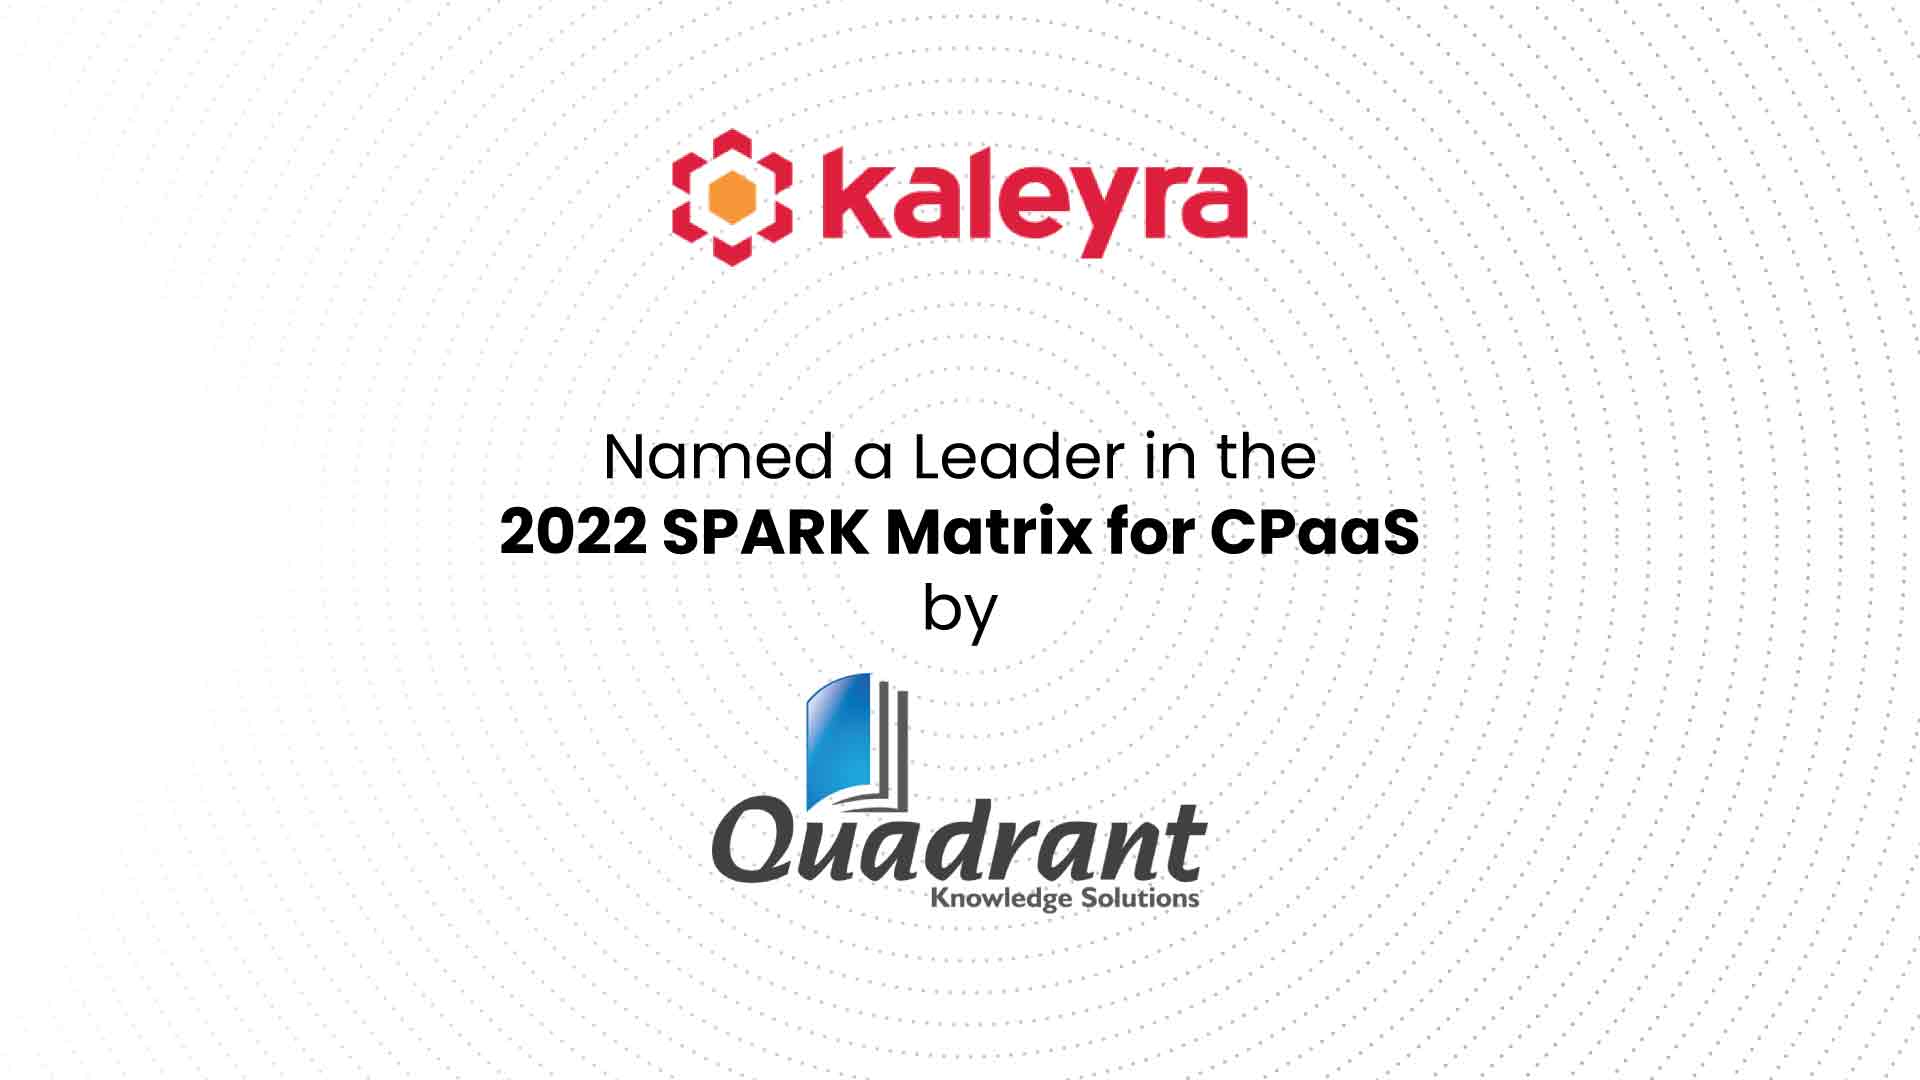 'Kaleyra' is positioned as a Leader in the 2022 SPARK Matrix™ for Communications Platform as a Service (CPaaS) by Quadrant Knowledge Solutions